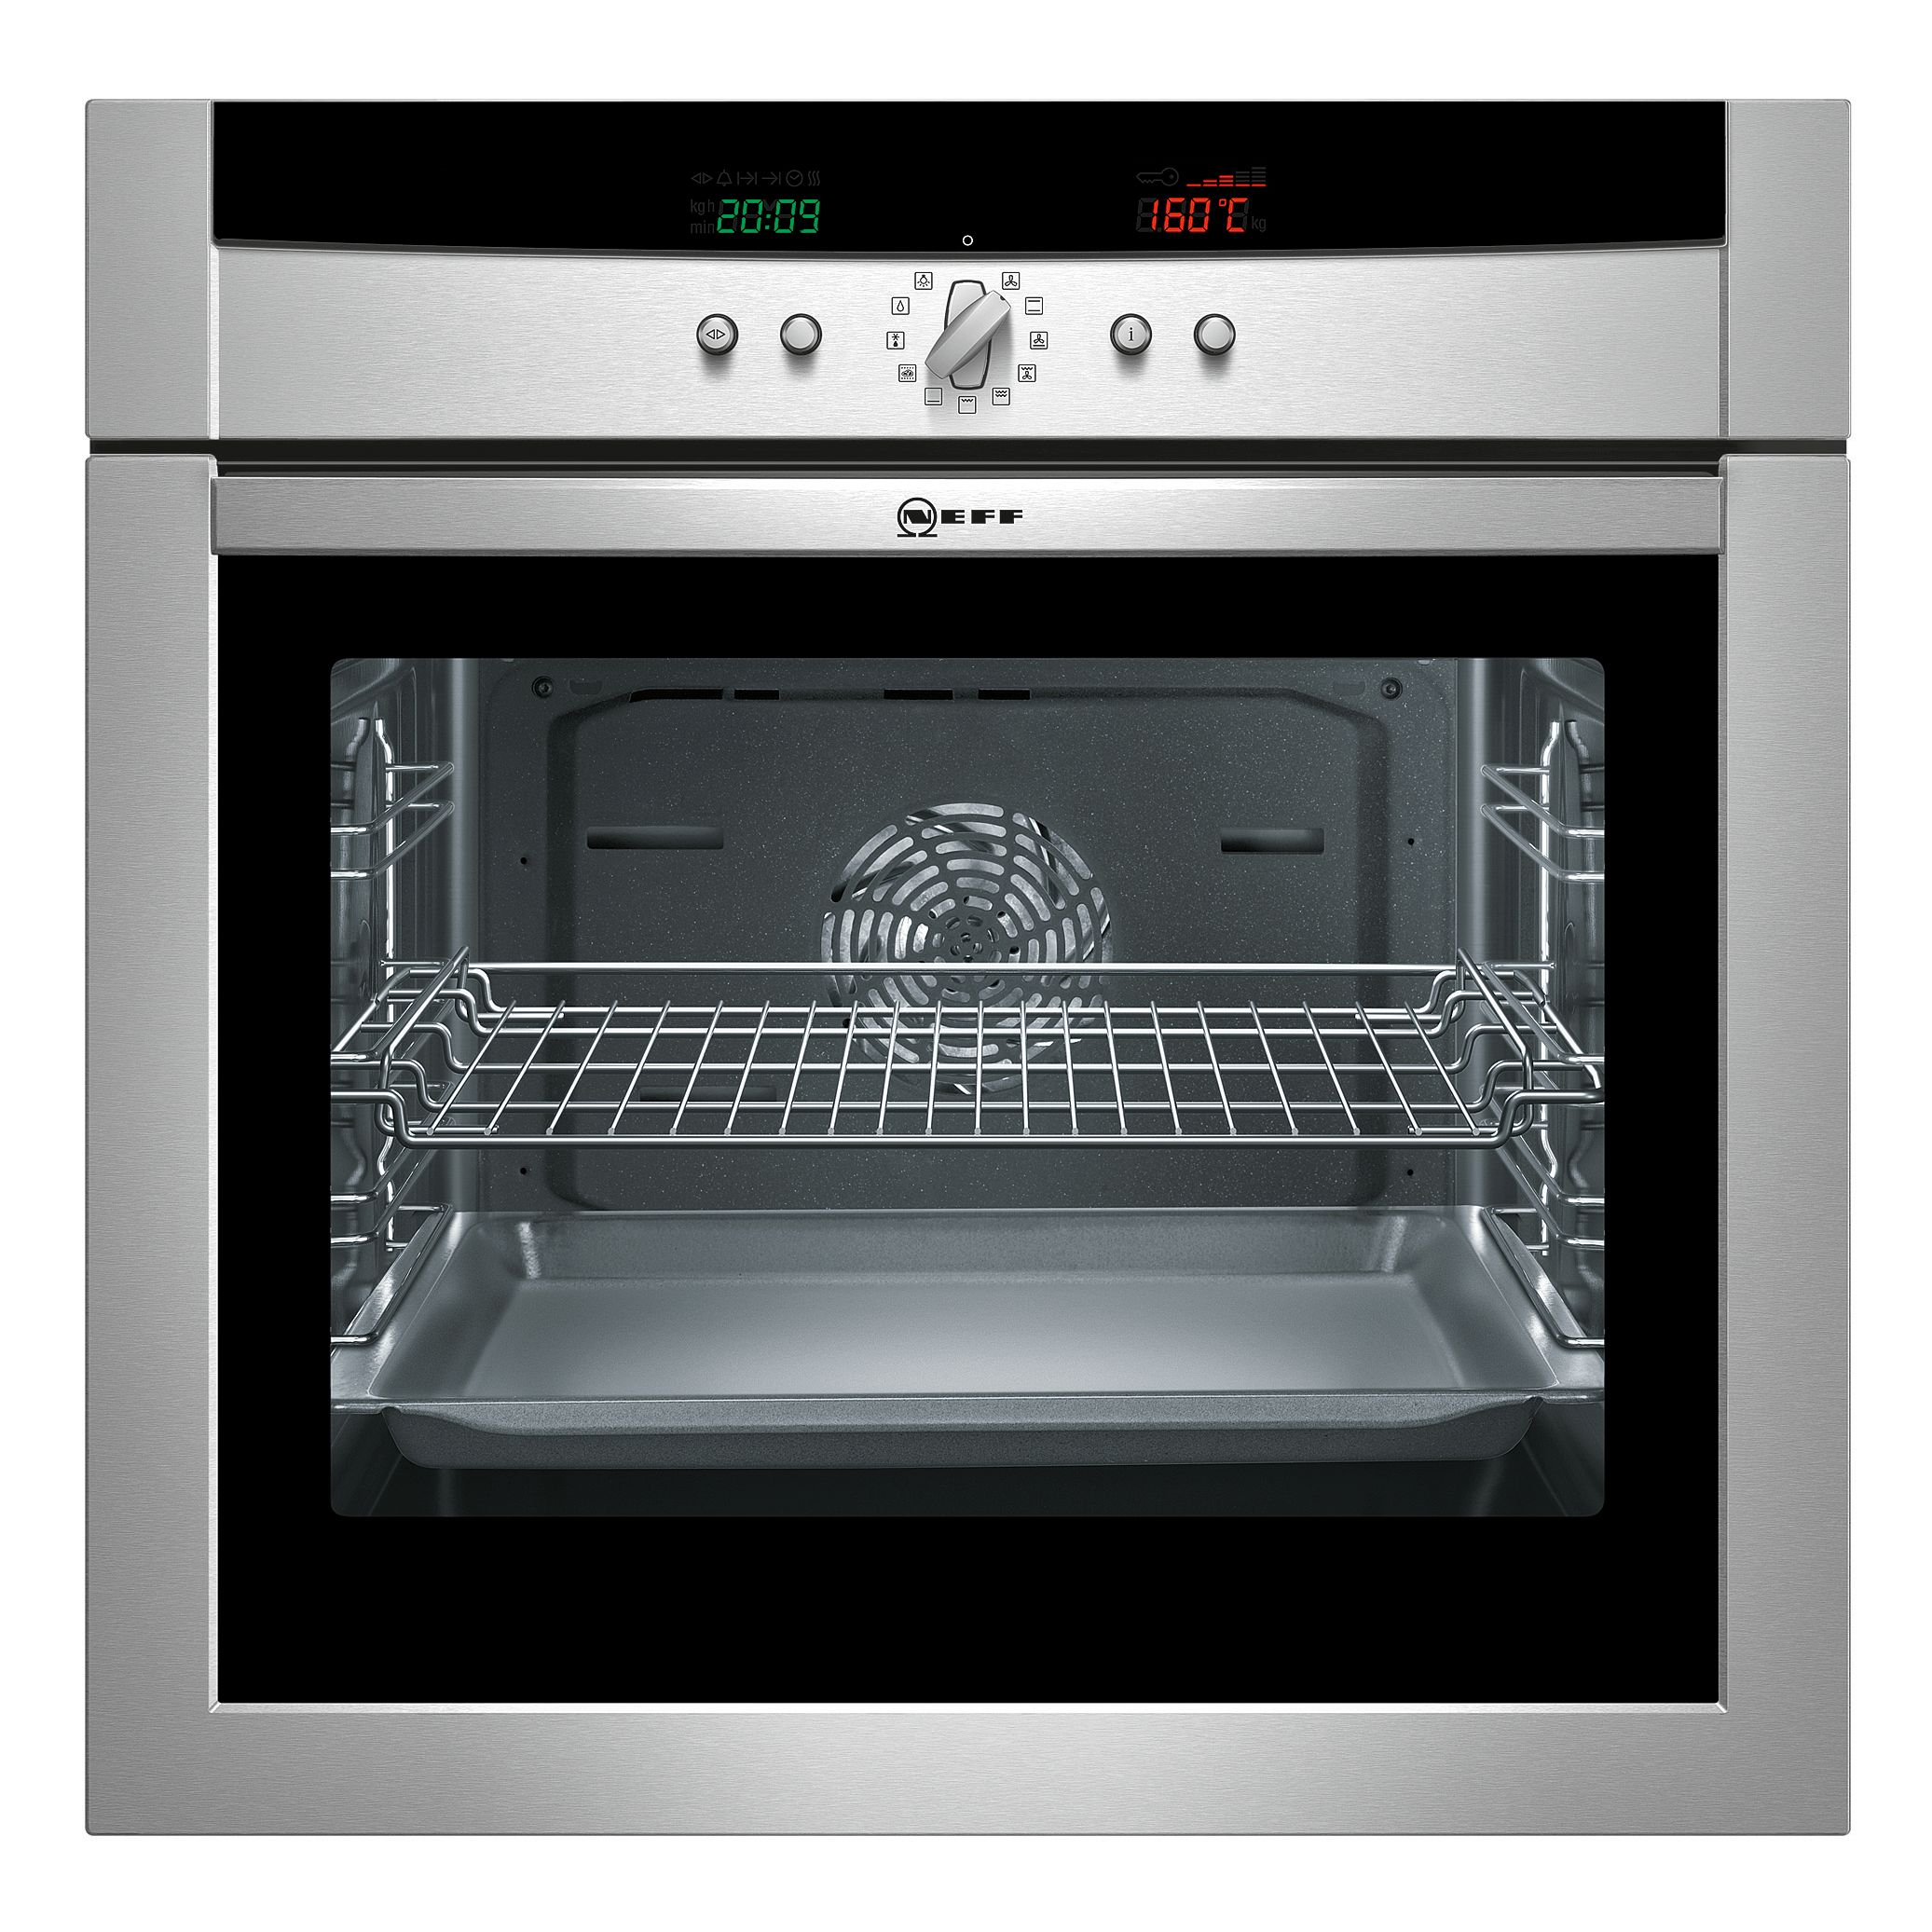 Neff B15E42N0GB Single Electric Oven, Stainless Steel at John Lewis